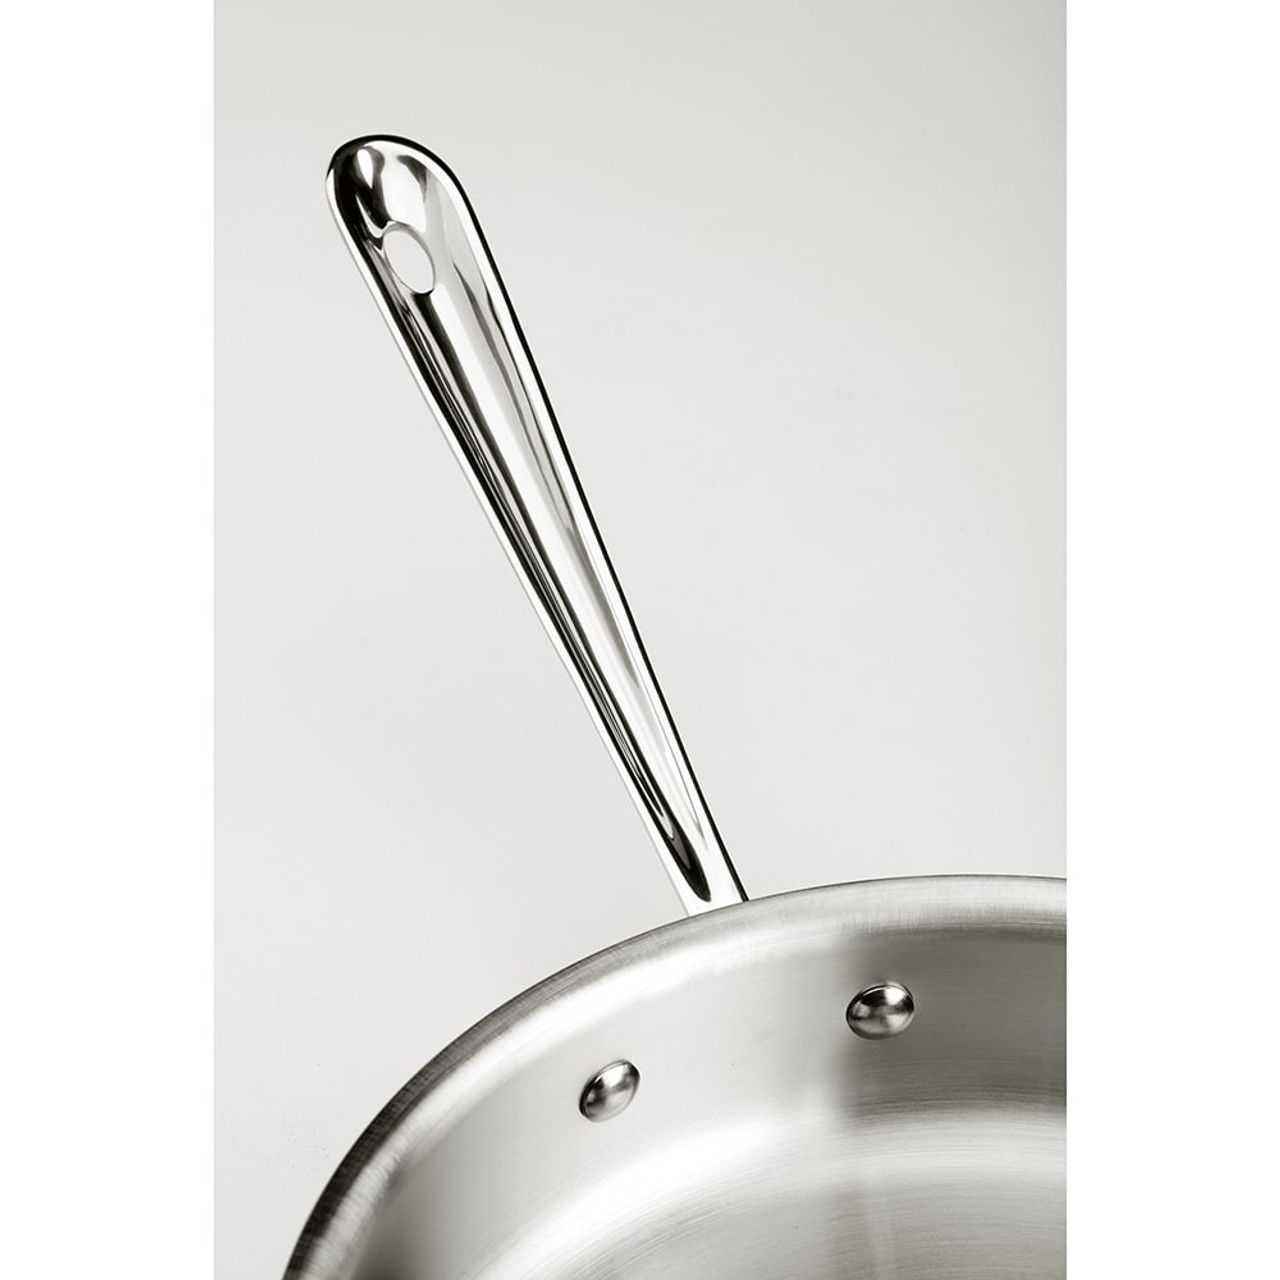  All-Clad D3 3-Ply Stainless Steel Fry Pan 12 Inch